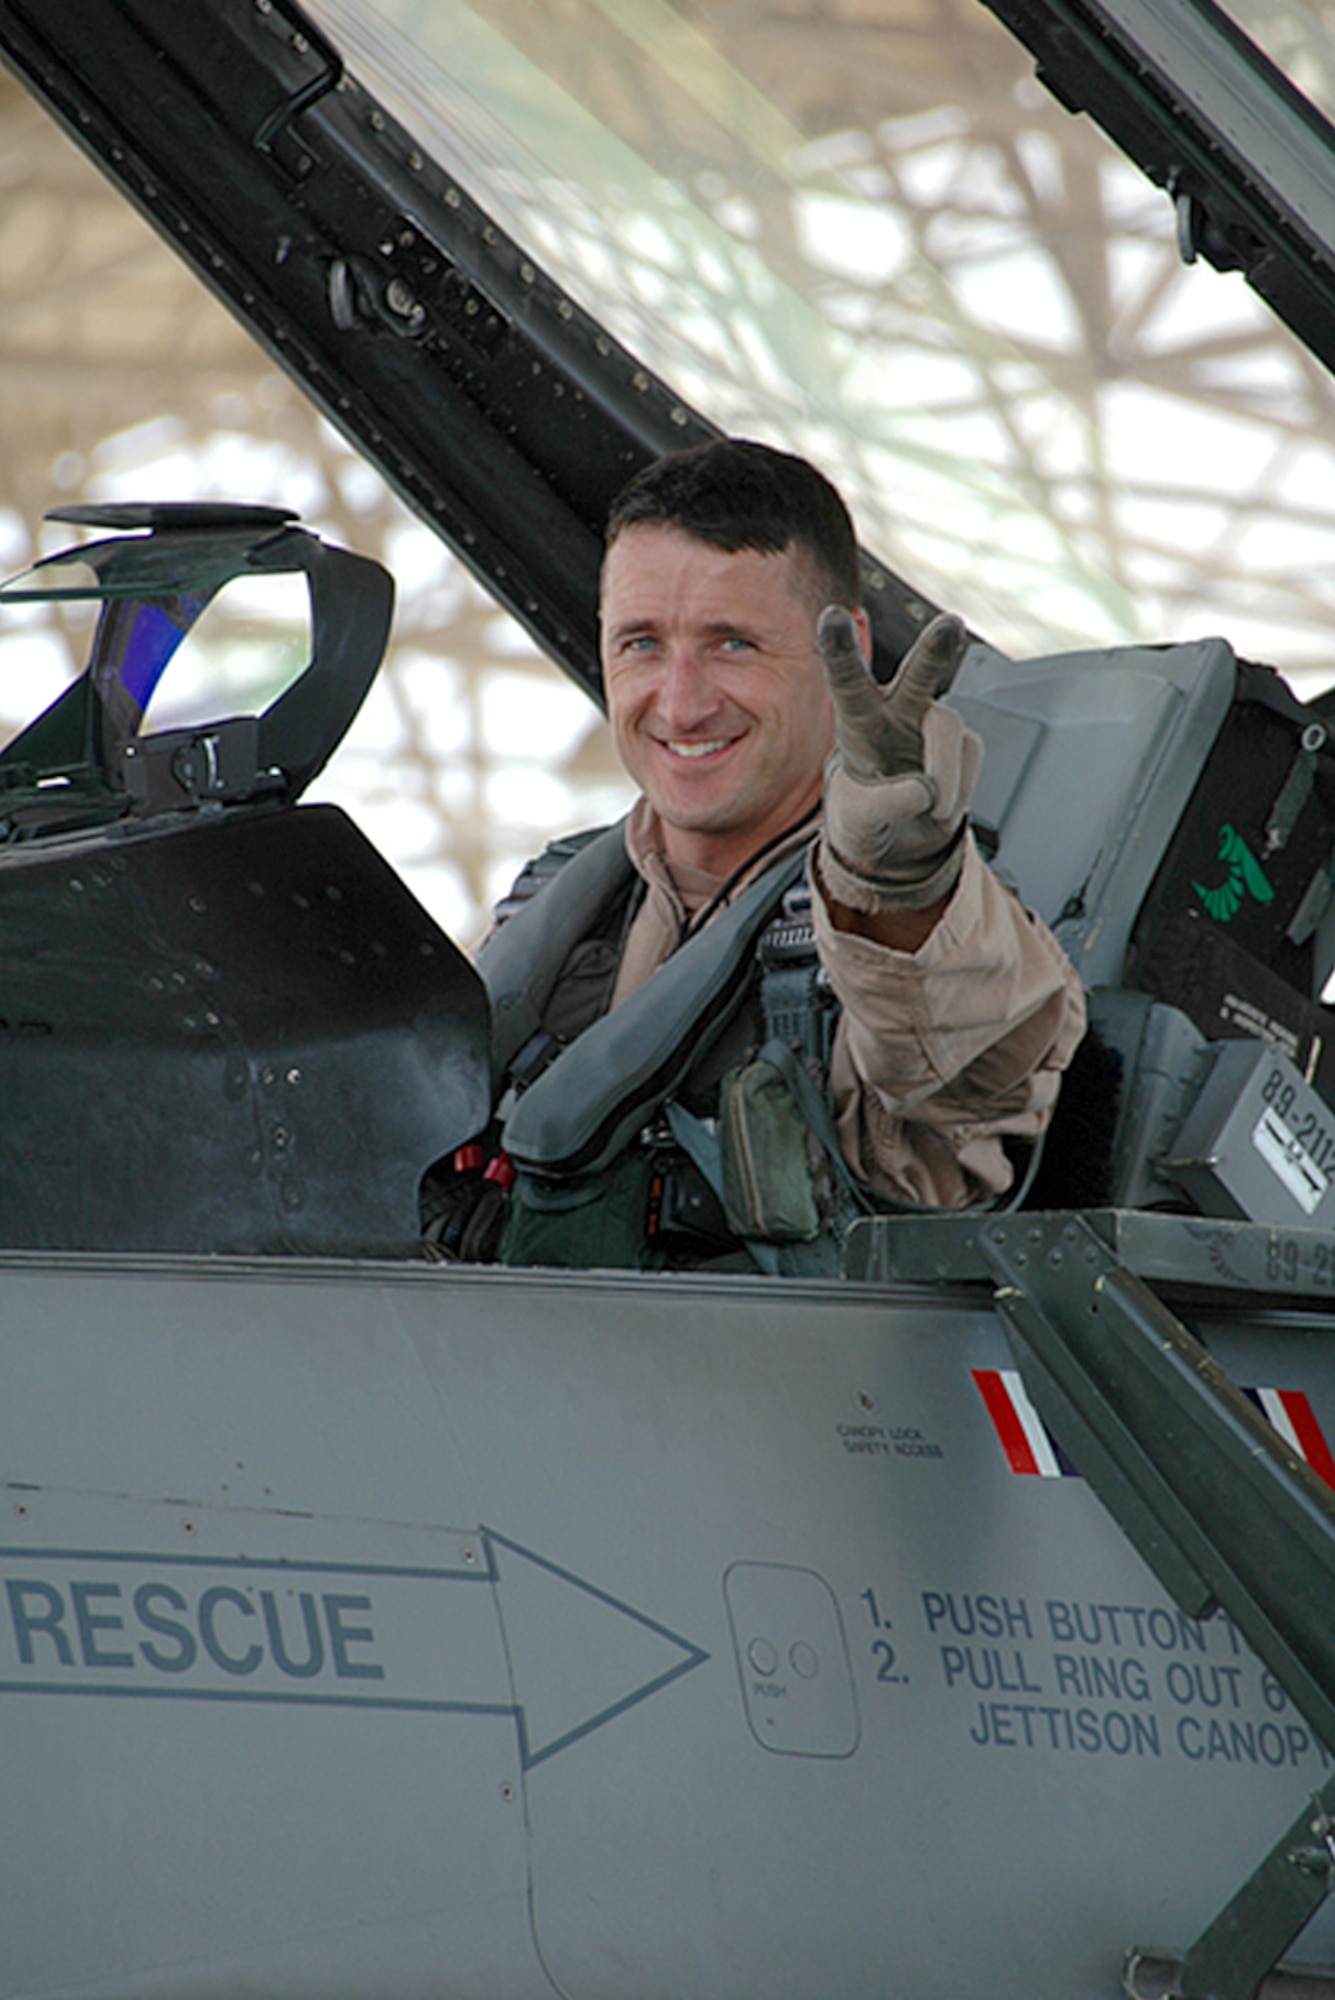 Col. Steven S. Nordhaus, currently the 180th Fighter Wing Commander, Ohio Air National Guard, prepares for a combat sortie in support Operation Enduring Freedom at Al Udeid Air Base, Qatar in 2005. (U.S. Air National Guard Photo by Master Sgt. Beth Holliker / Released).